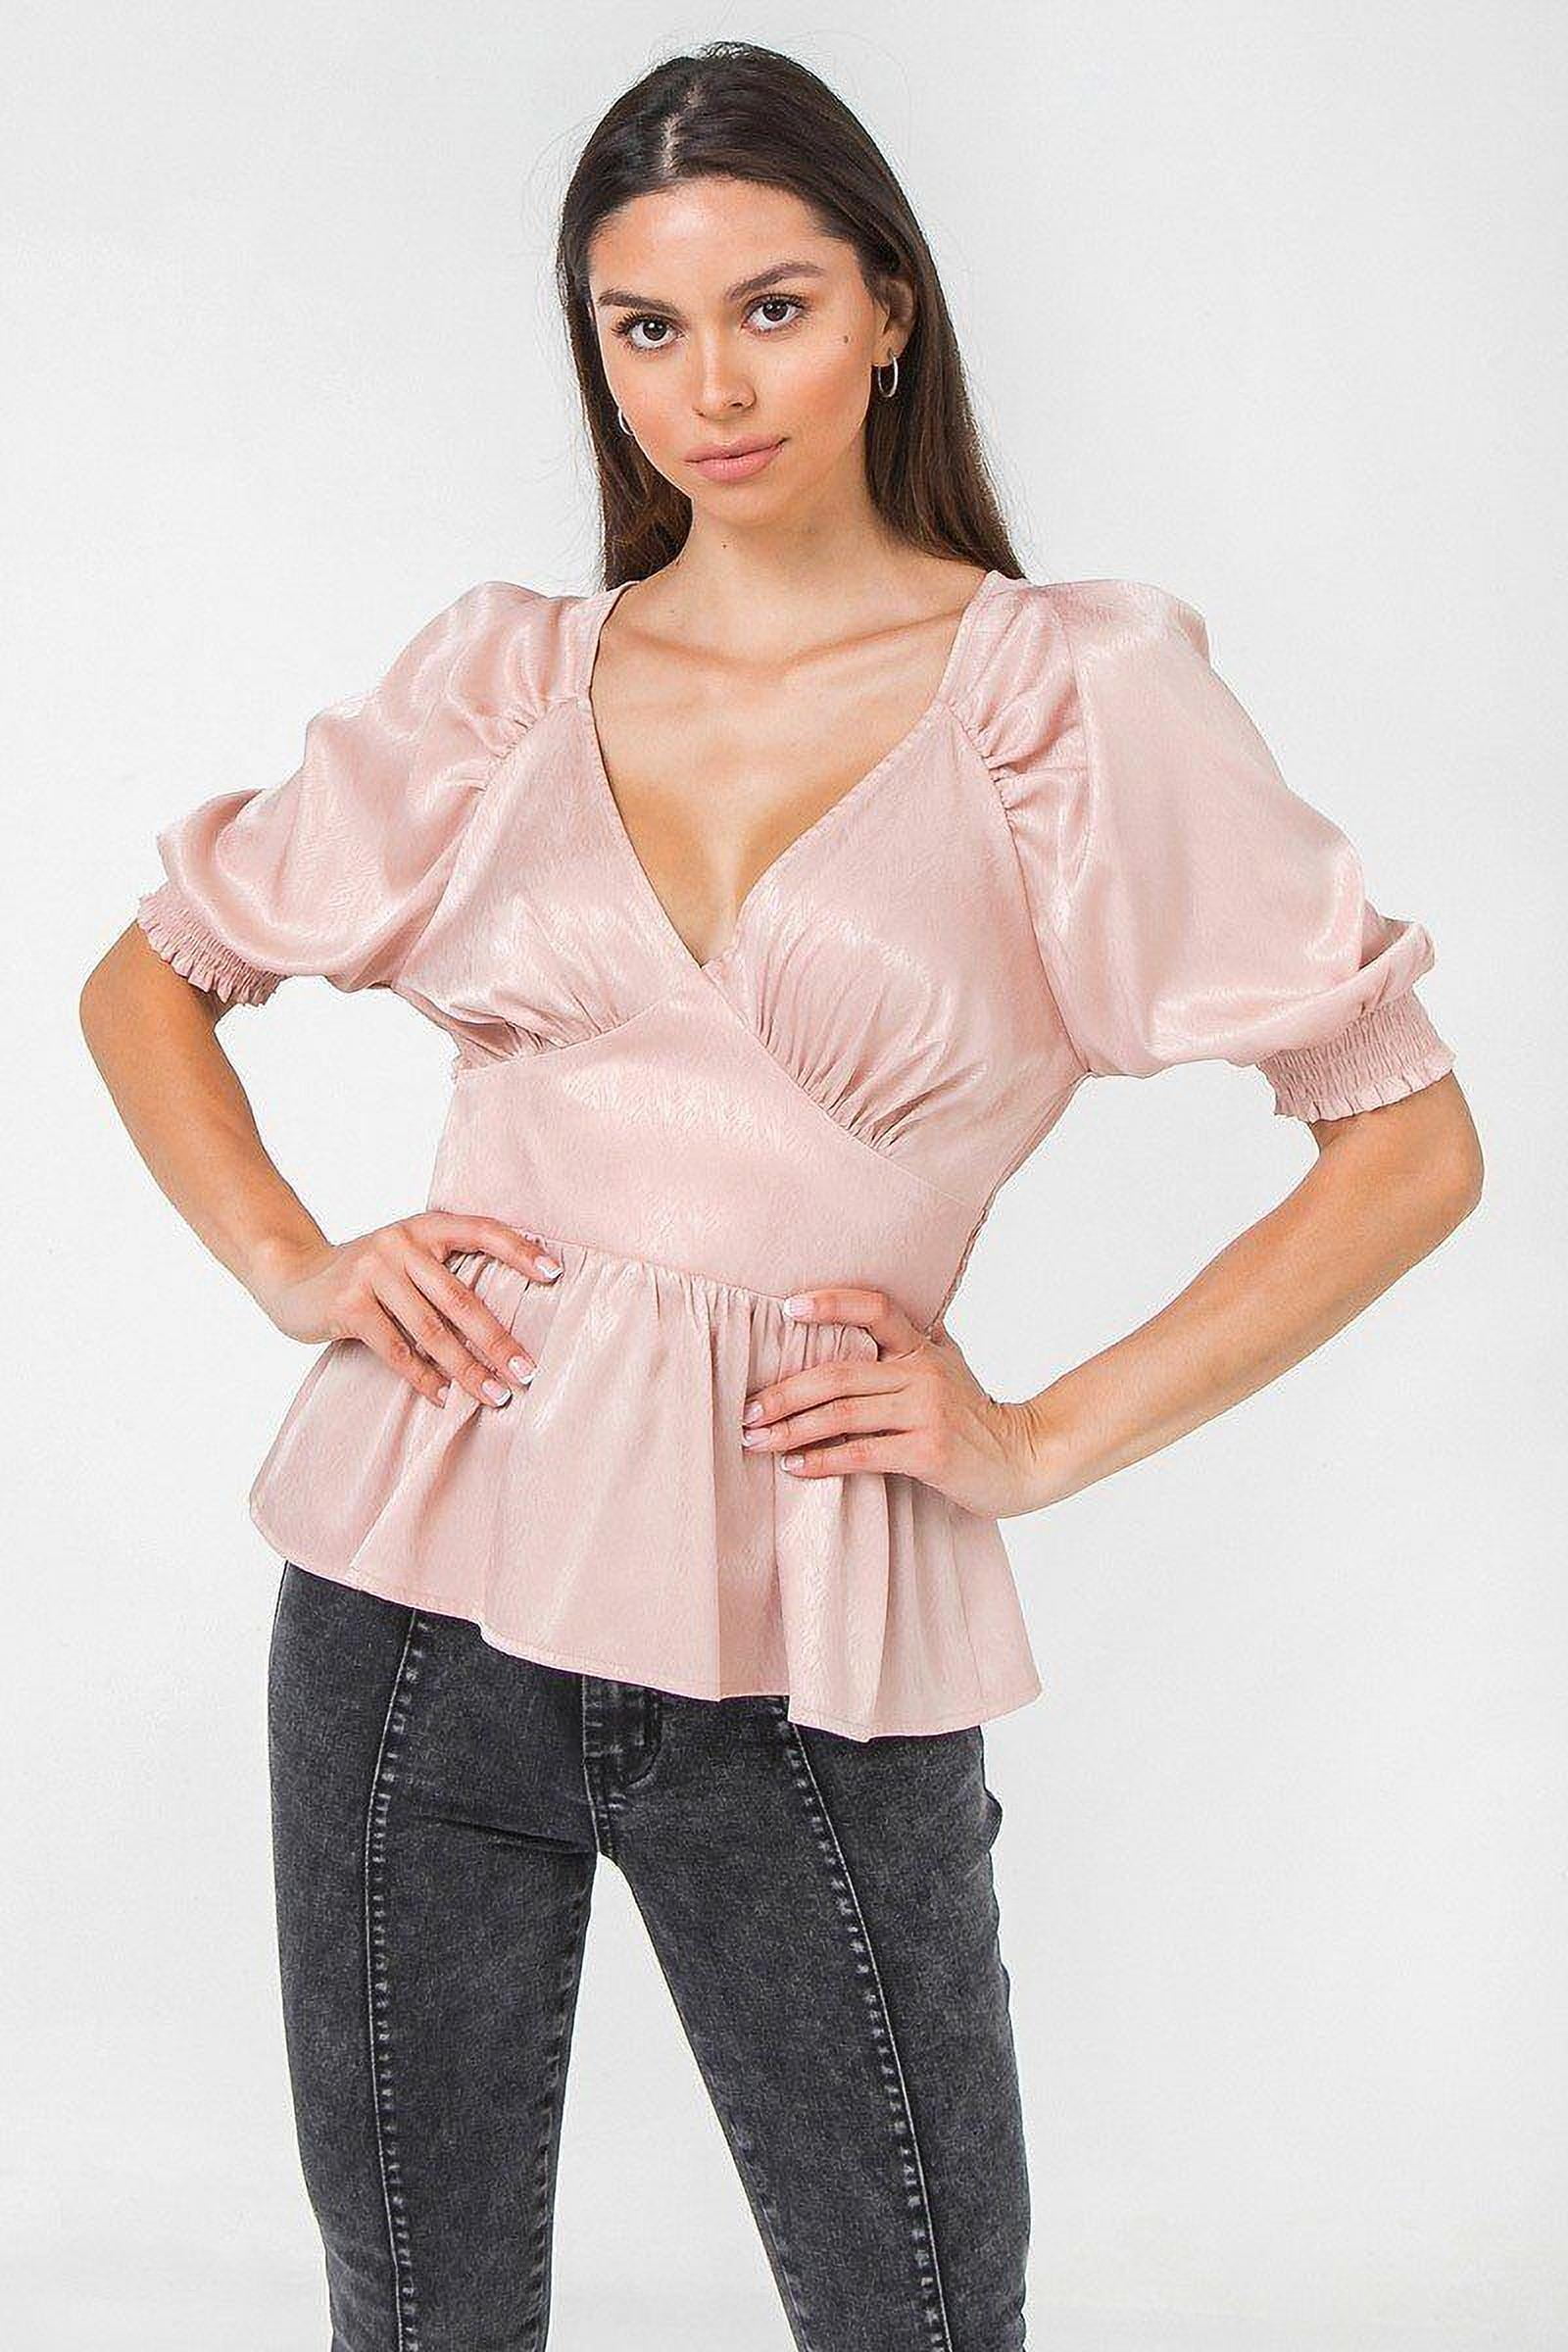 Romeo and Juliet Couture MIST ROSE Women's Long Ruffle Sleeve Top, US Small